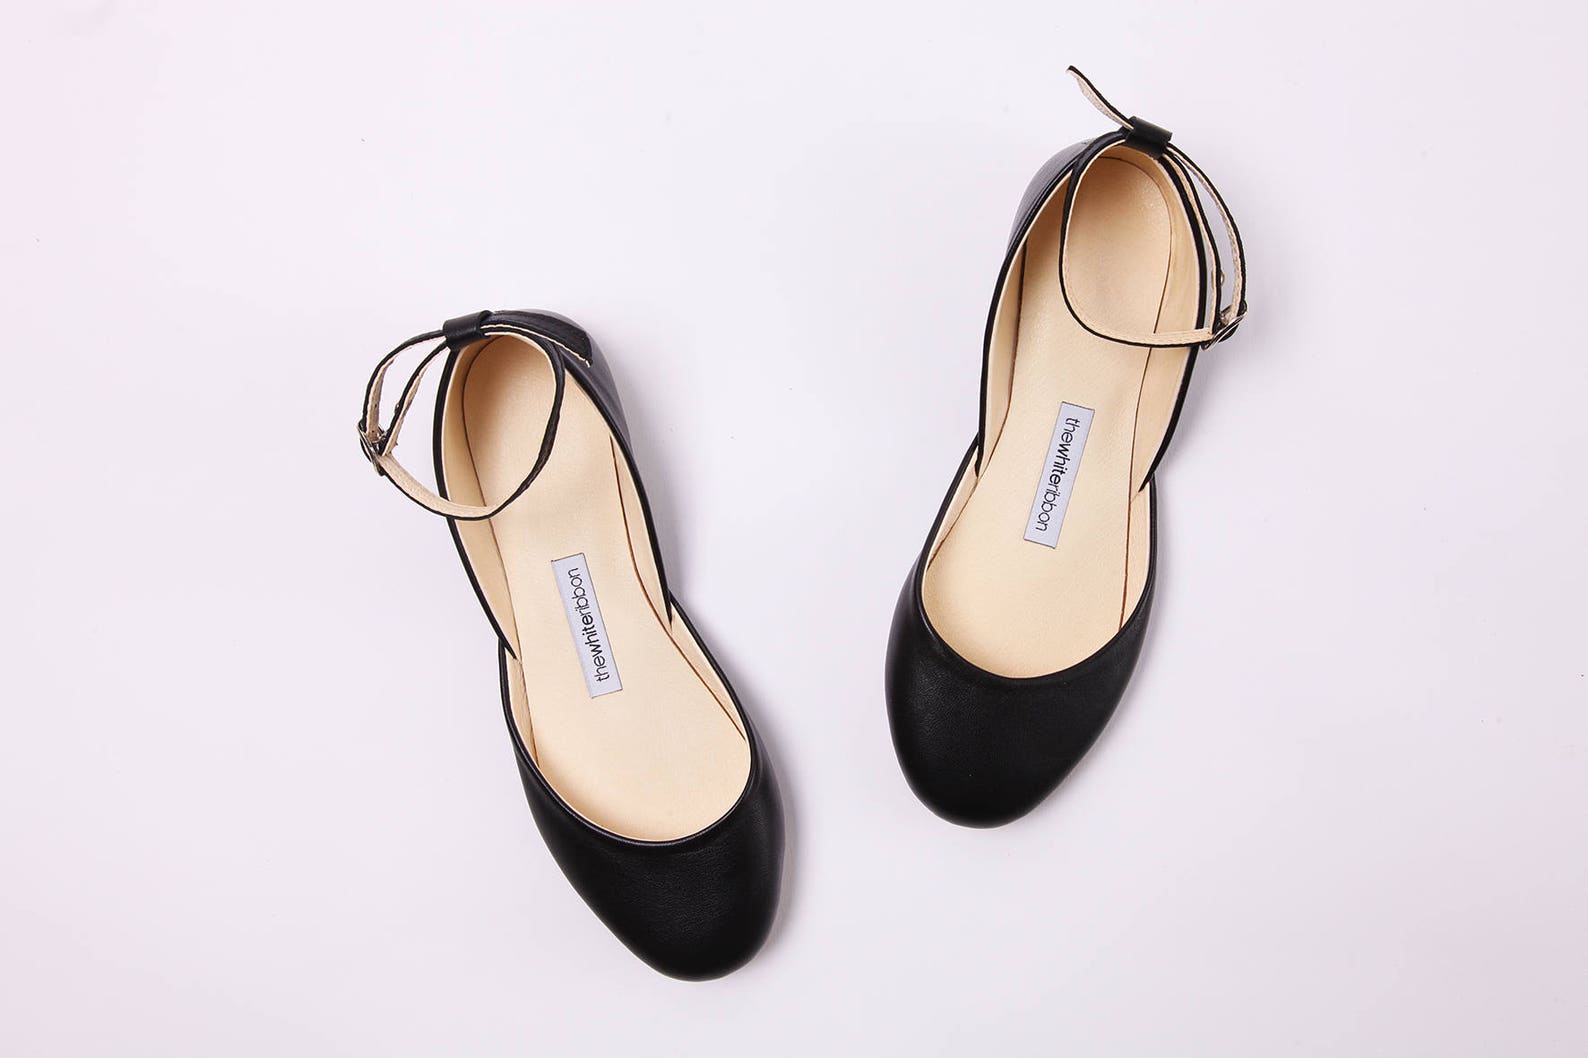 mary jane ballet flats in black leather | pointe style shoes | classic model | standard width | black mary janes | ready to ship